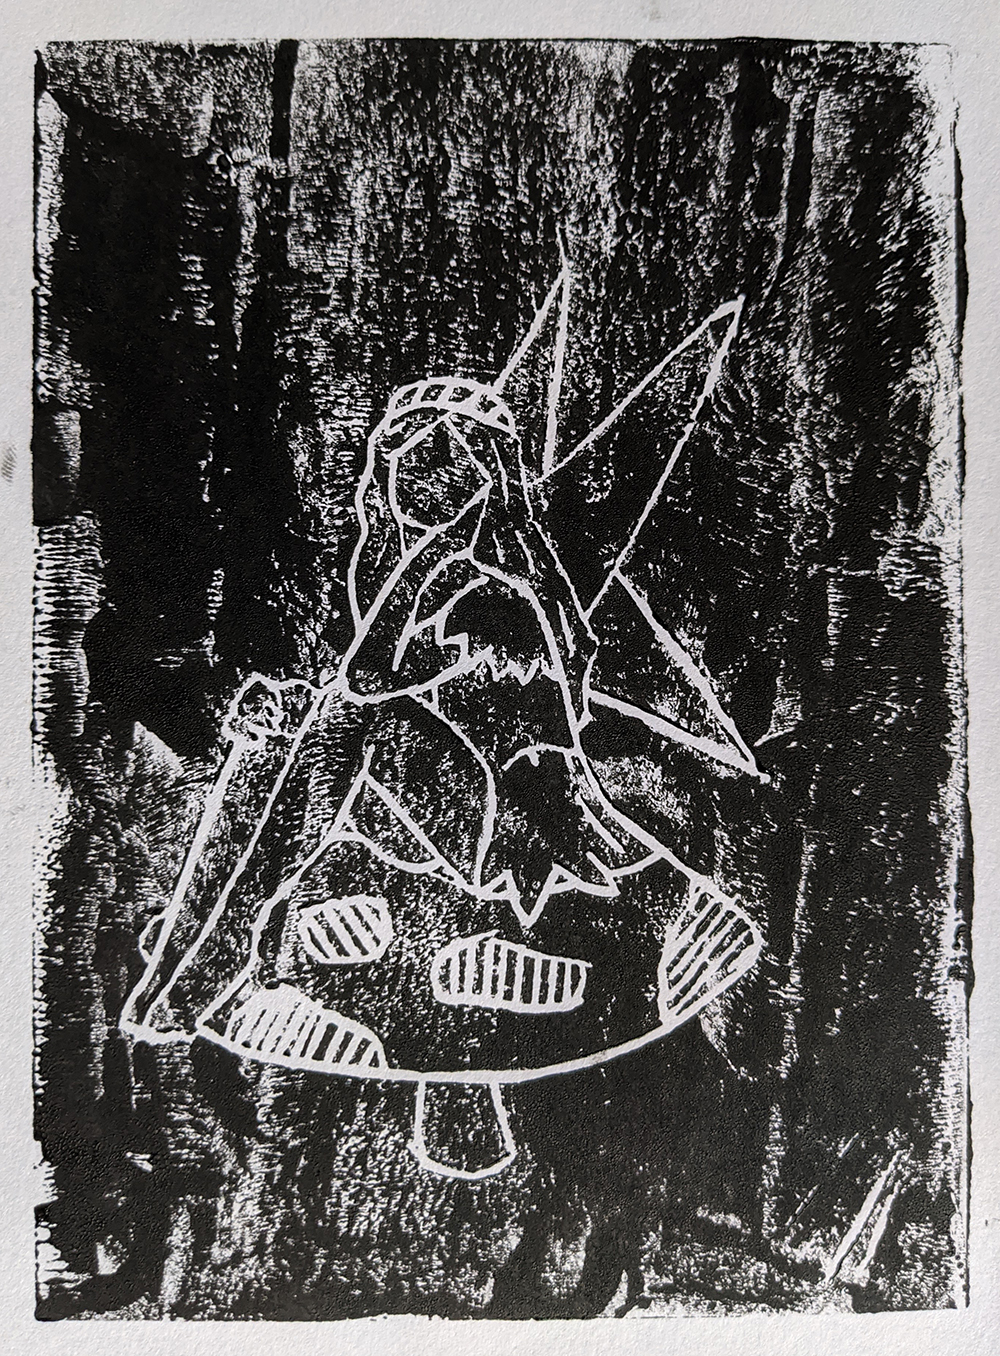 Image shows a black and white screenprinted fairy sitting on a toadstool, image created by Lucy Thompson